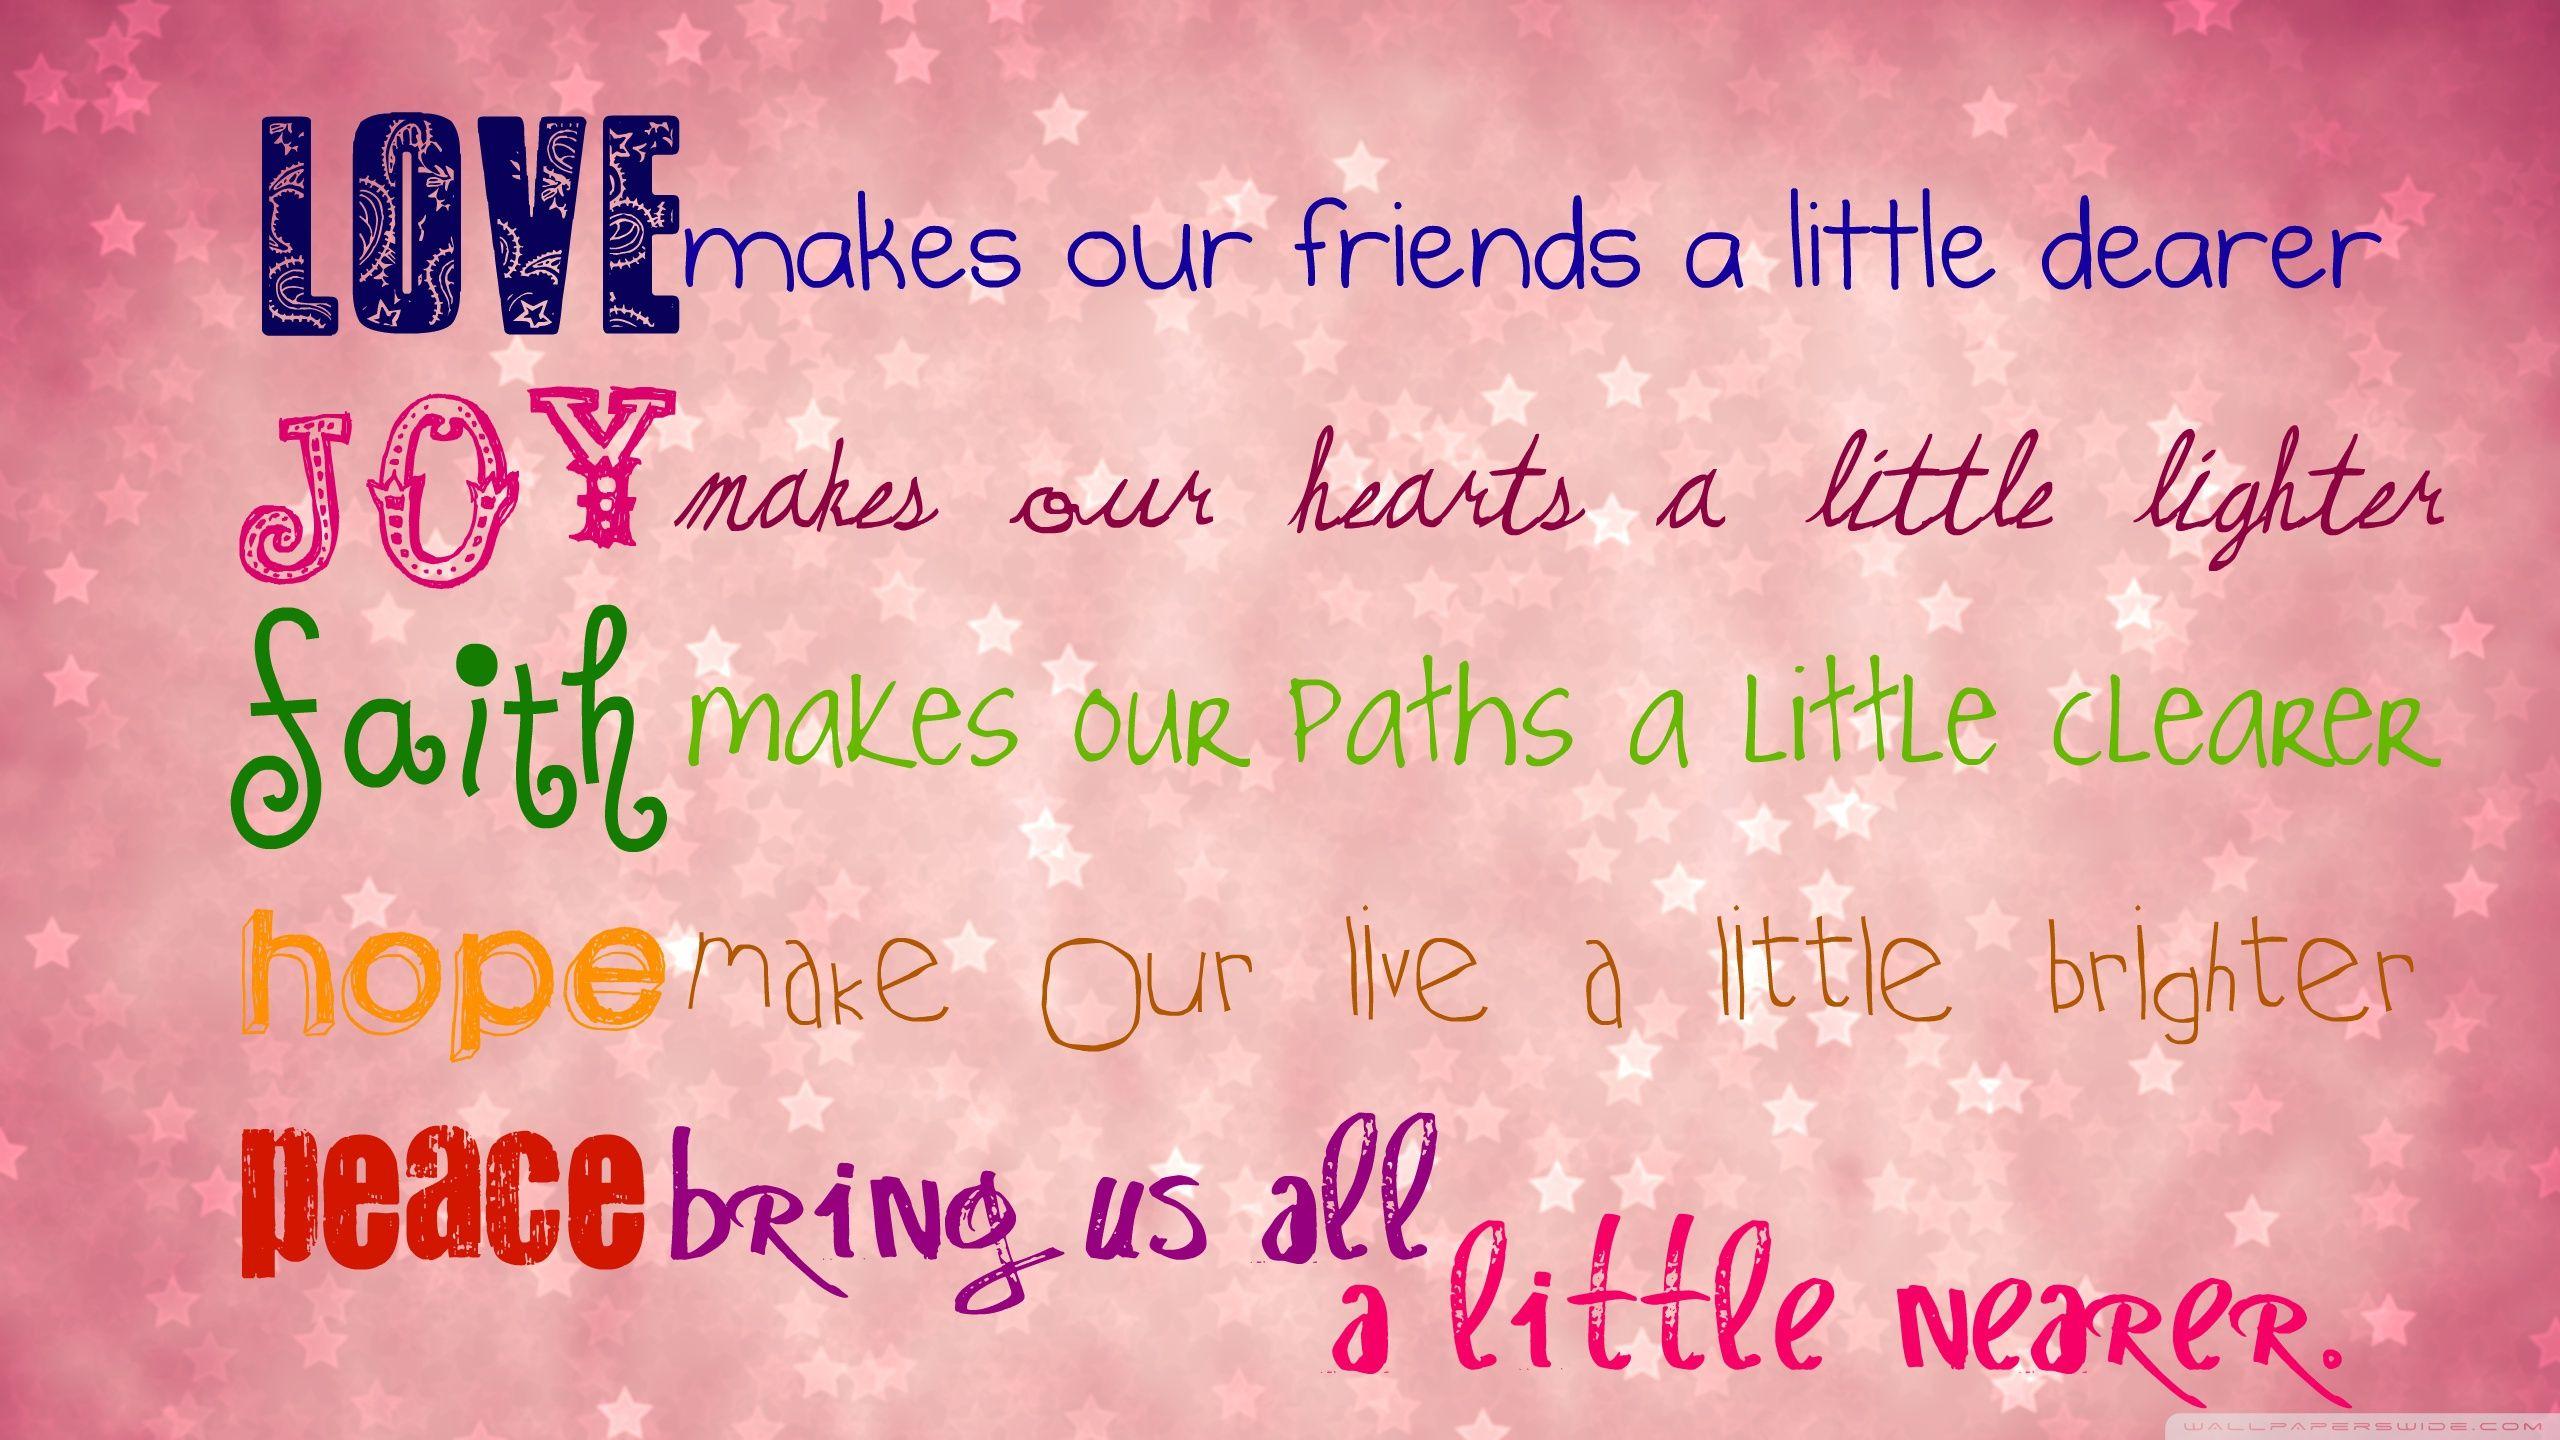 Facebook Cover Photo Quotes About Friends wallpaper